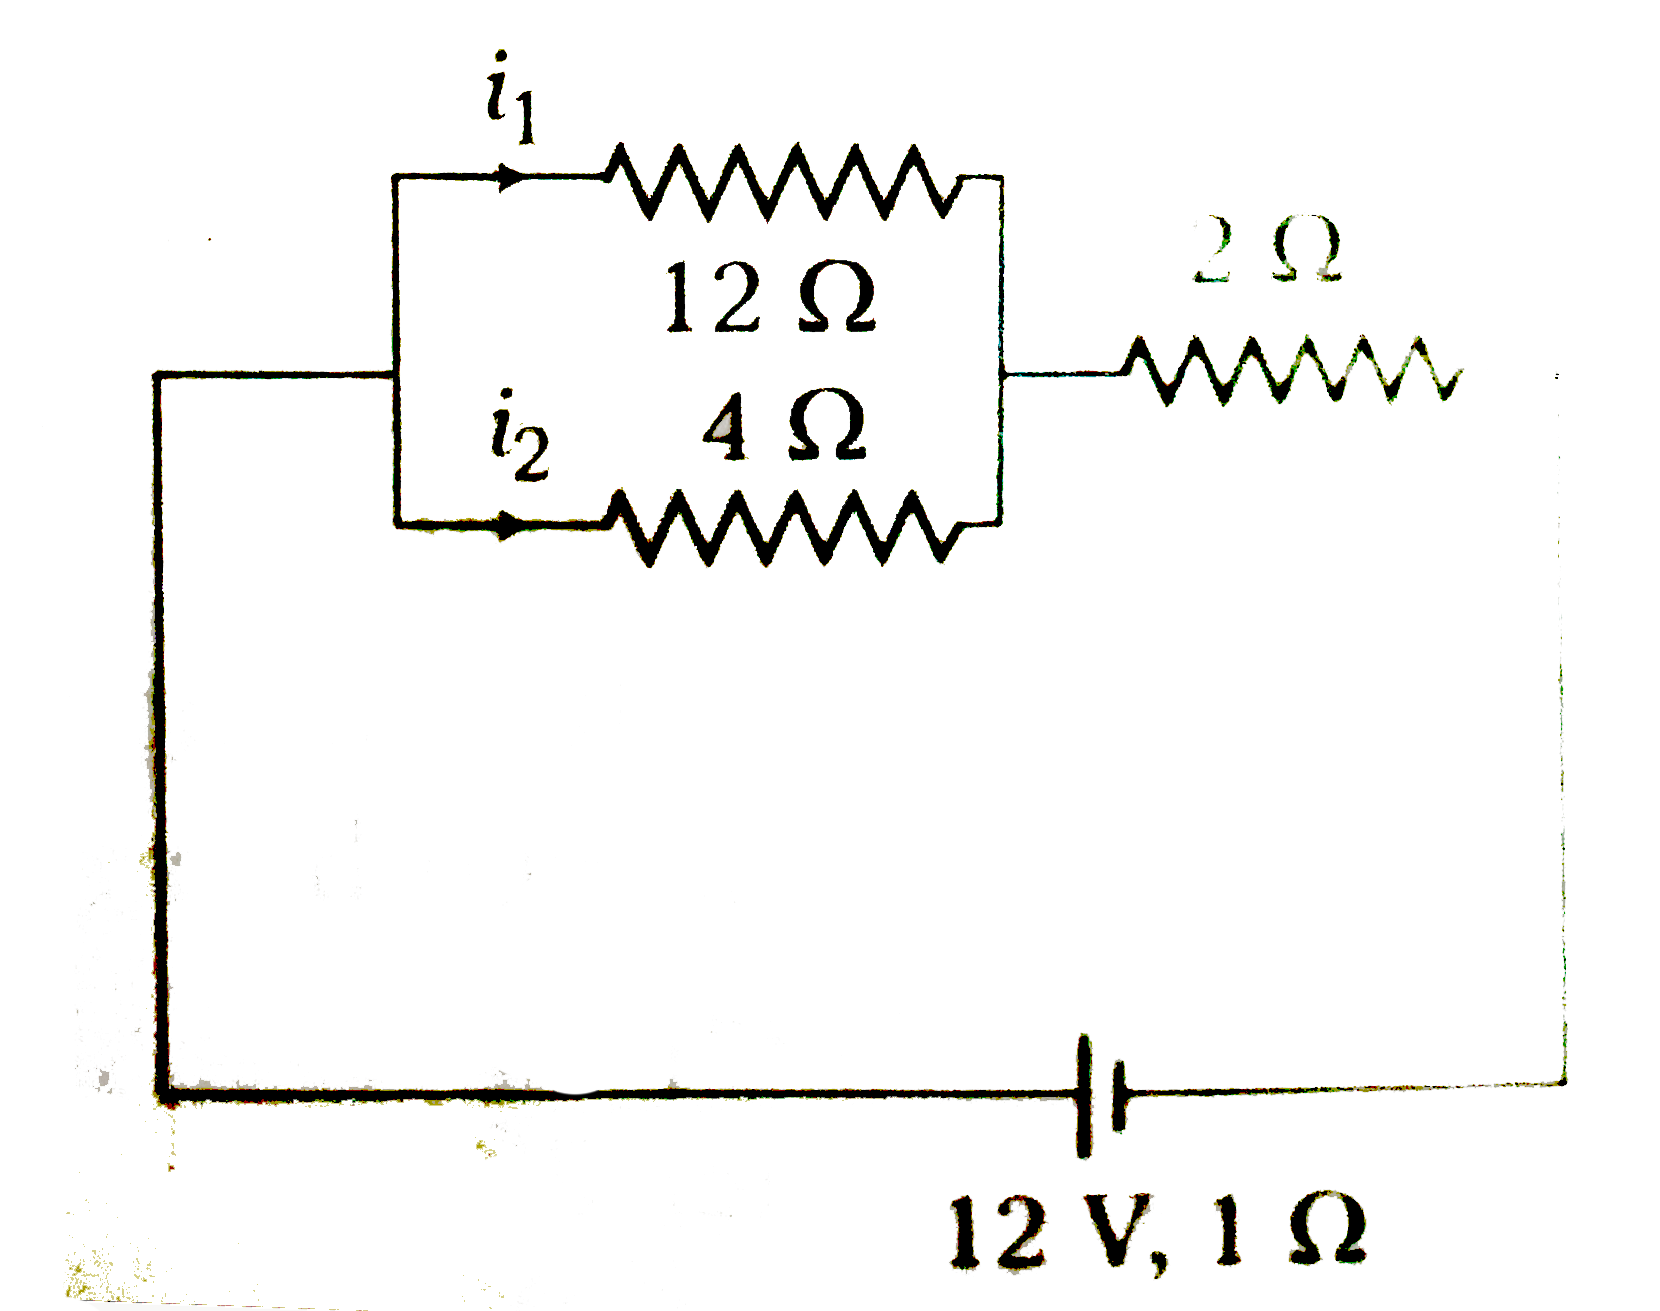 In the circuit shown, the currents i(1) and i(2) are